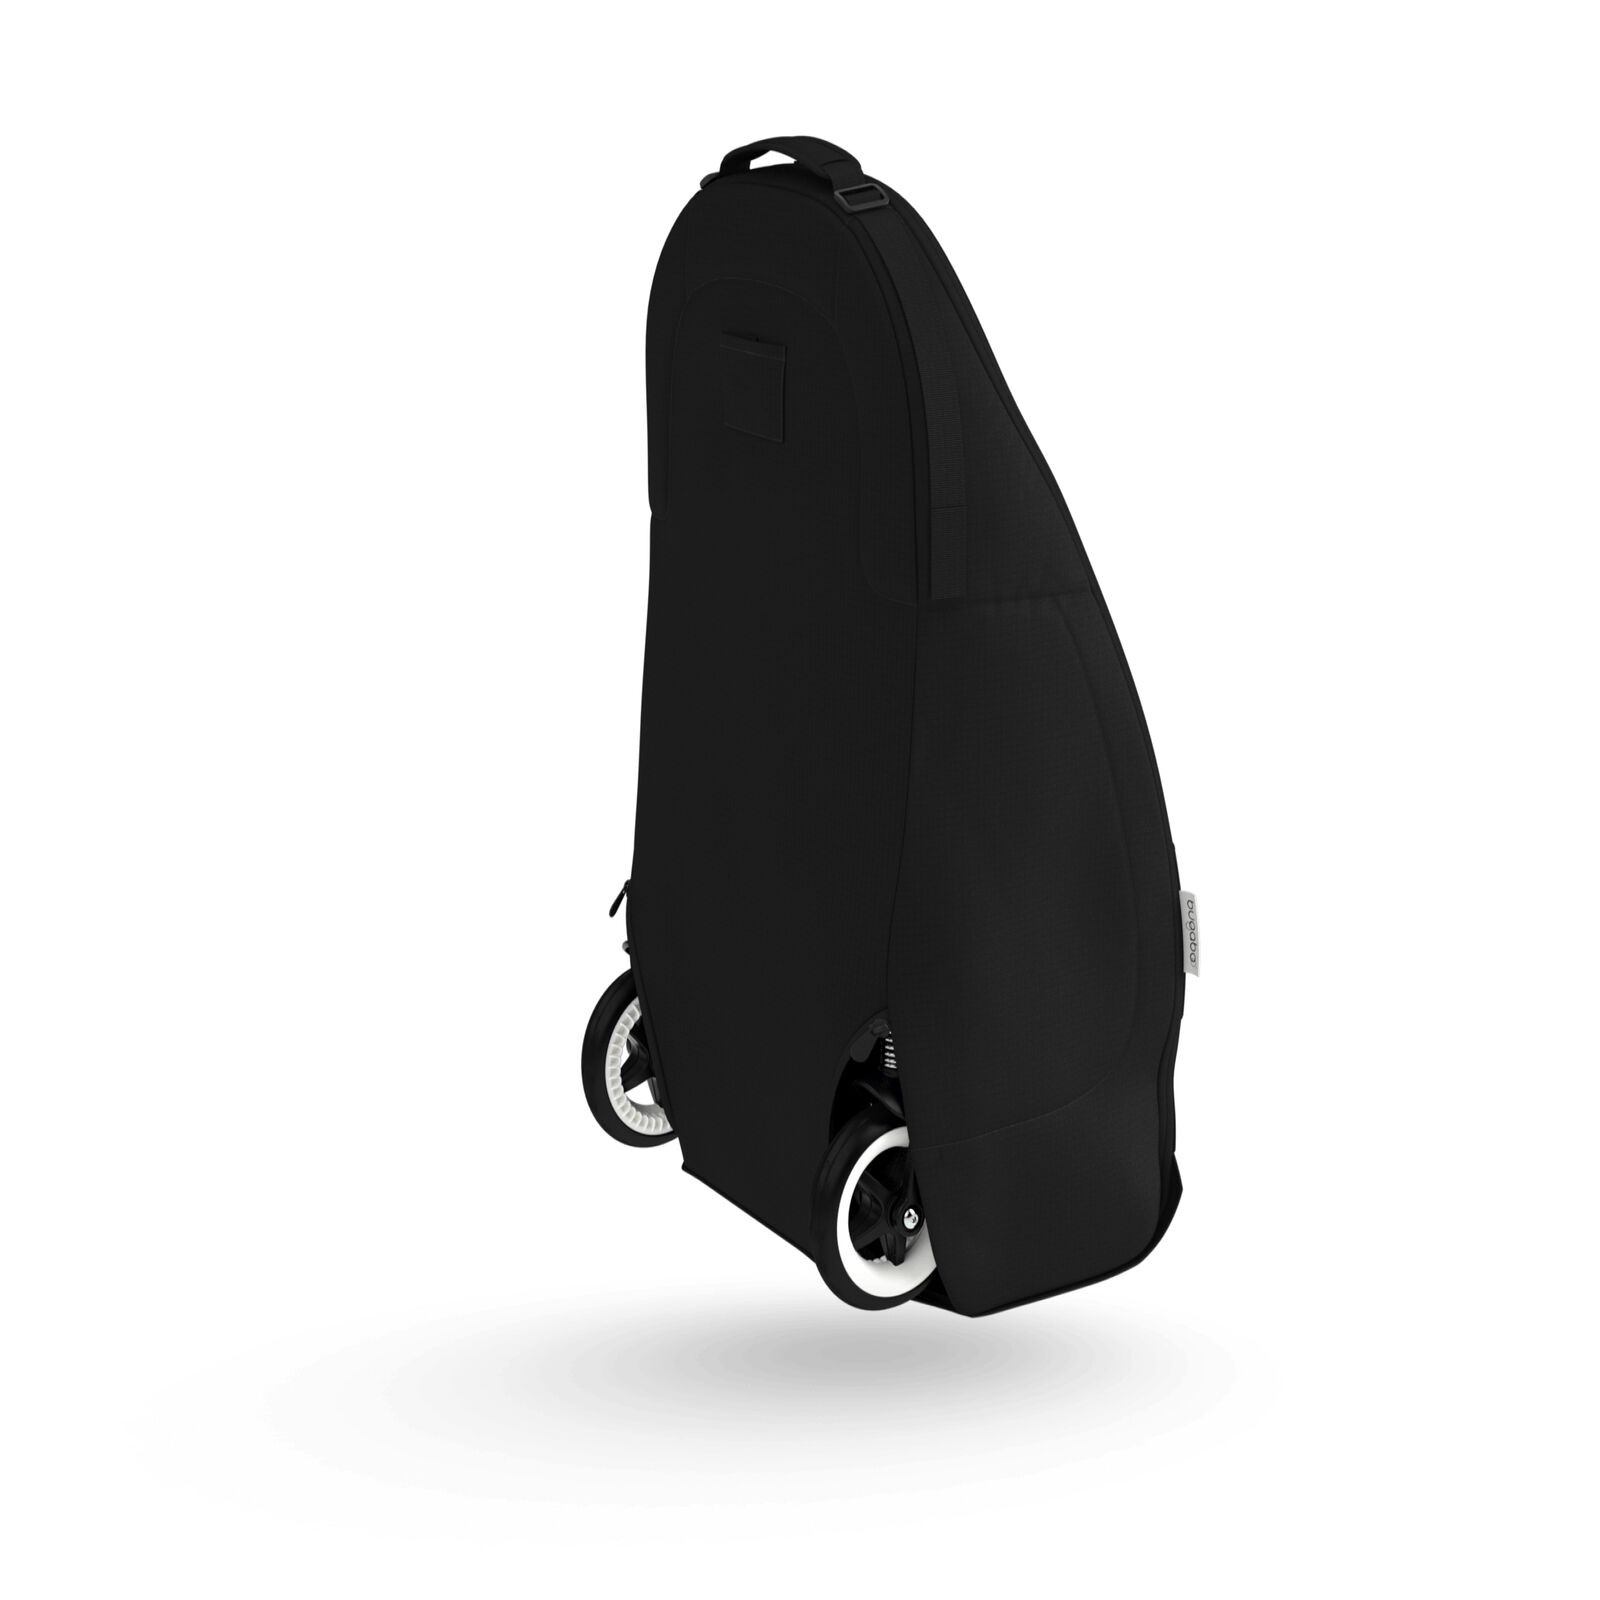 Bugaboo compact transport bag - View 7